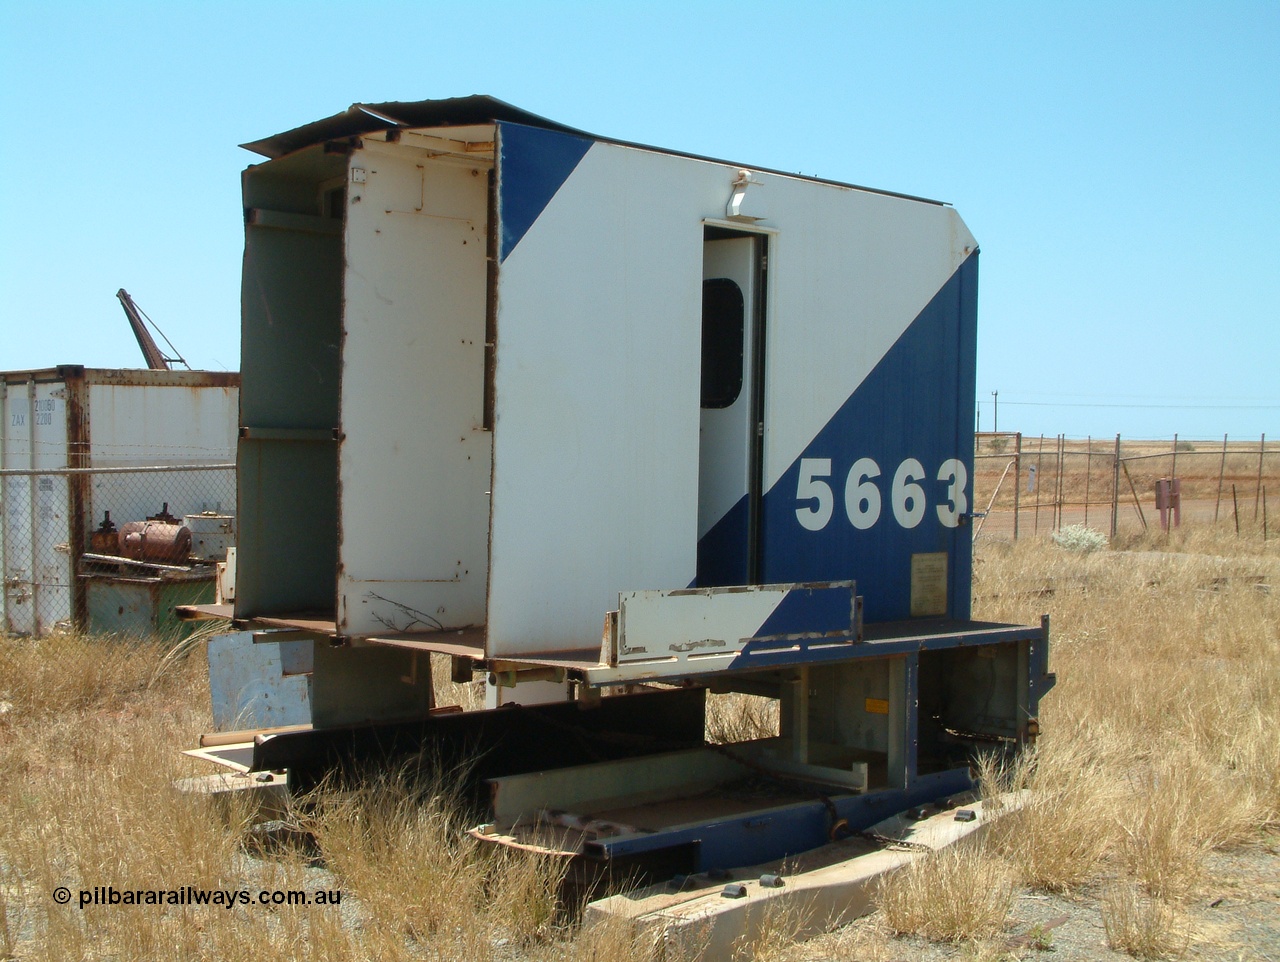 041014 122434
Pilbara Railways Historical Society, the Locotrol 'cab' from Goninan WA rebuild CM40-8ML unit 5663 Newcastle, one of three units built without a driving cab in 1994 but with a Locotrol equipment cabinet to do away with the Locotrol waggons that were in use at the time. Eventually the three locomotives had driving cabs fitted. Donated to the Society around 1998? 14th October 2004.
Keywords: 5663;Goninan;GE;CM40-8ML;8412-08/94-154;rebuild;AE-Goodwin;ALCo;M636C;5476;G6047-8